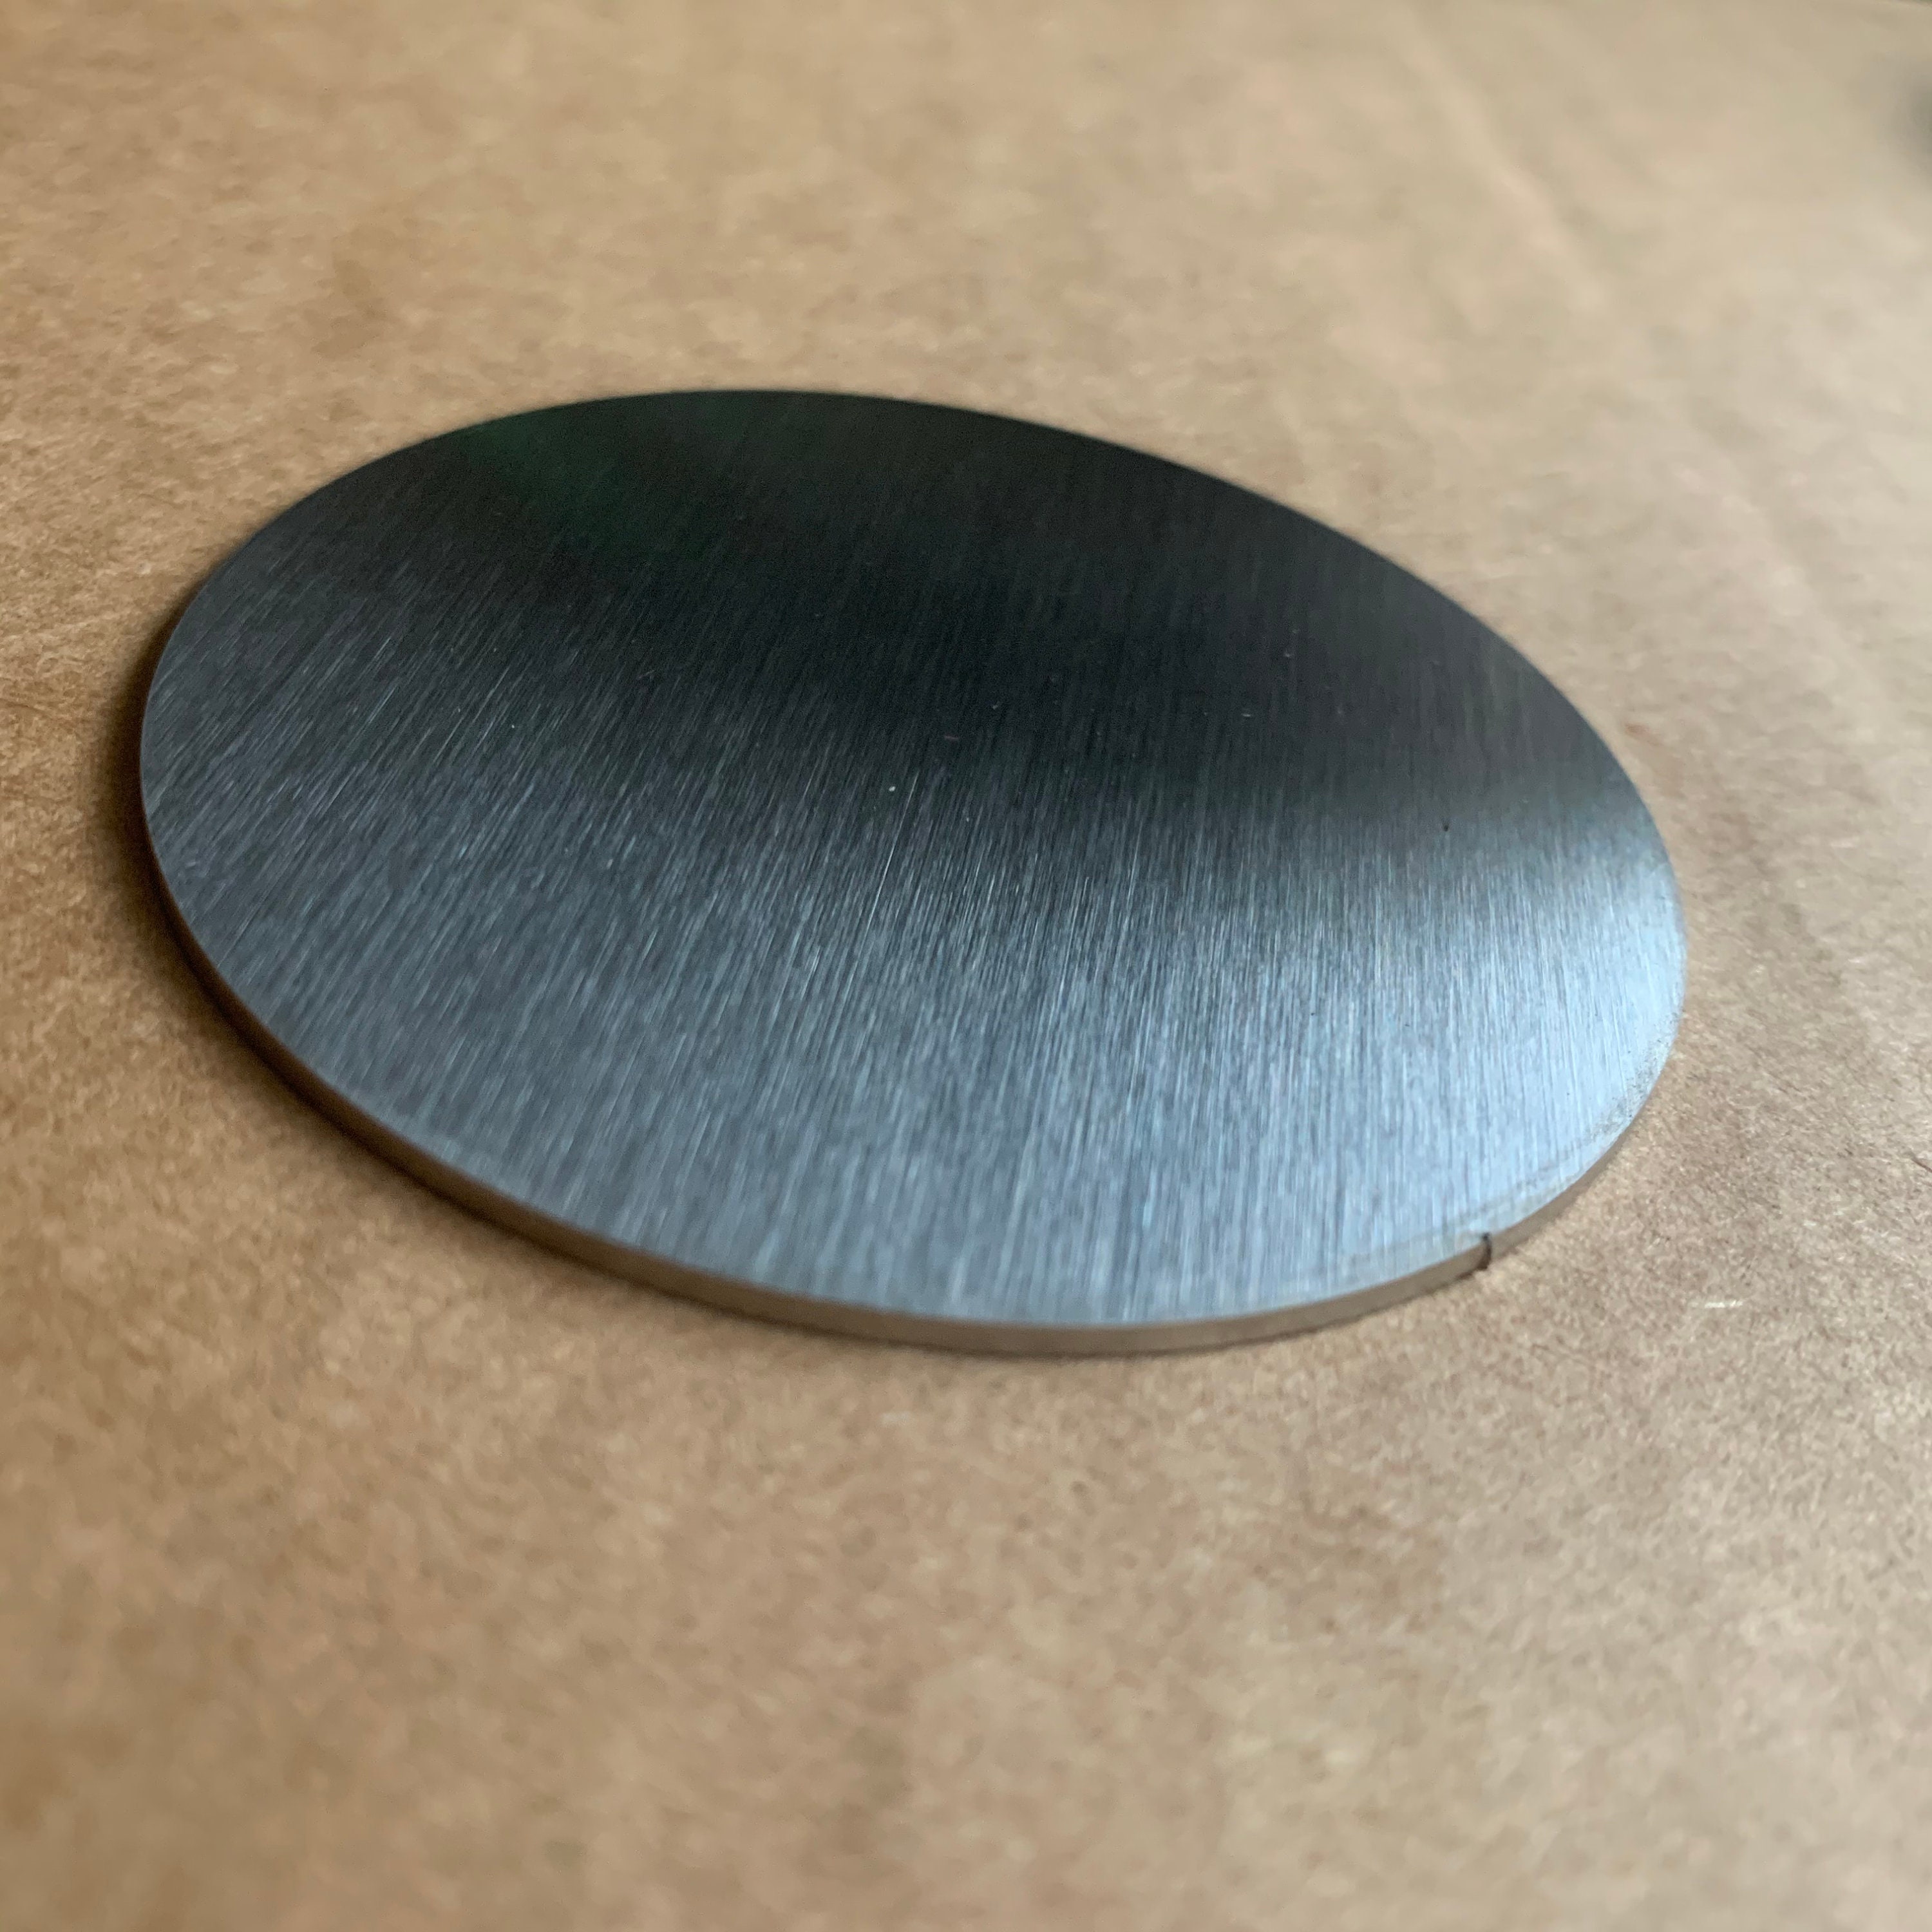 1/8 or  0.125 Thick #4 Finish Brushed Stainless 1/8 Thick Stainless Steel Blanks Discs,Pick a Diameter